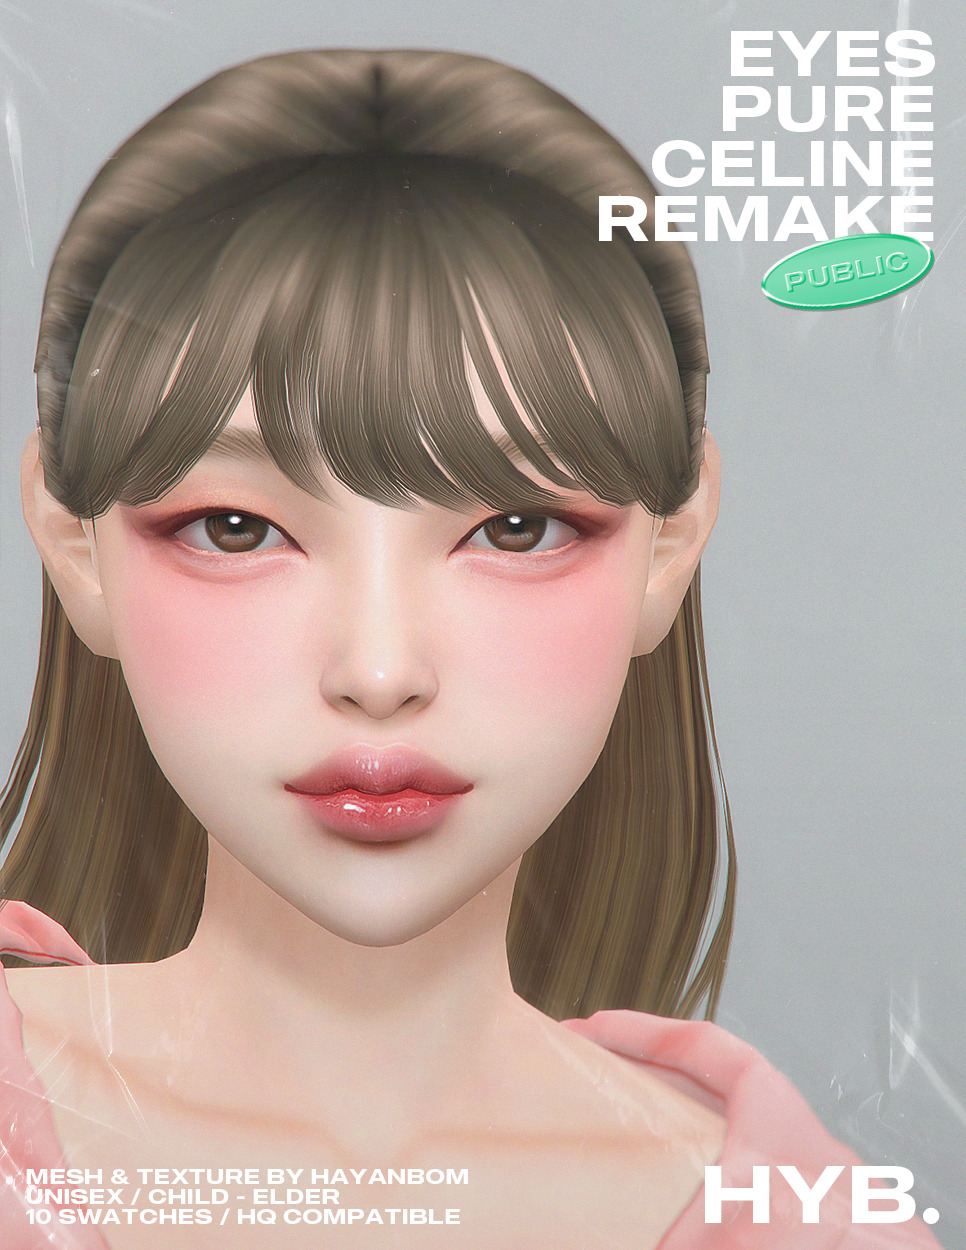 [HYB] PURE CELINE EYES REMAKE
Mesh & Texture by…